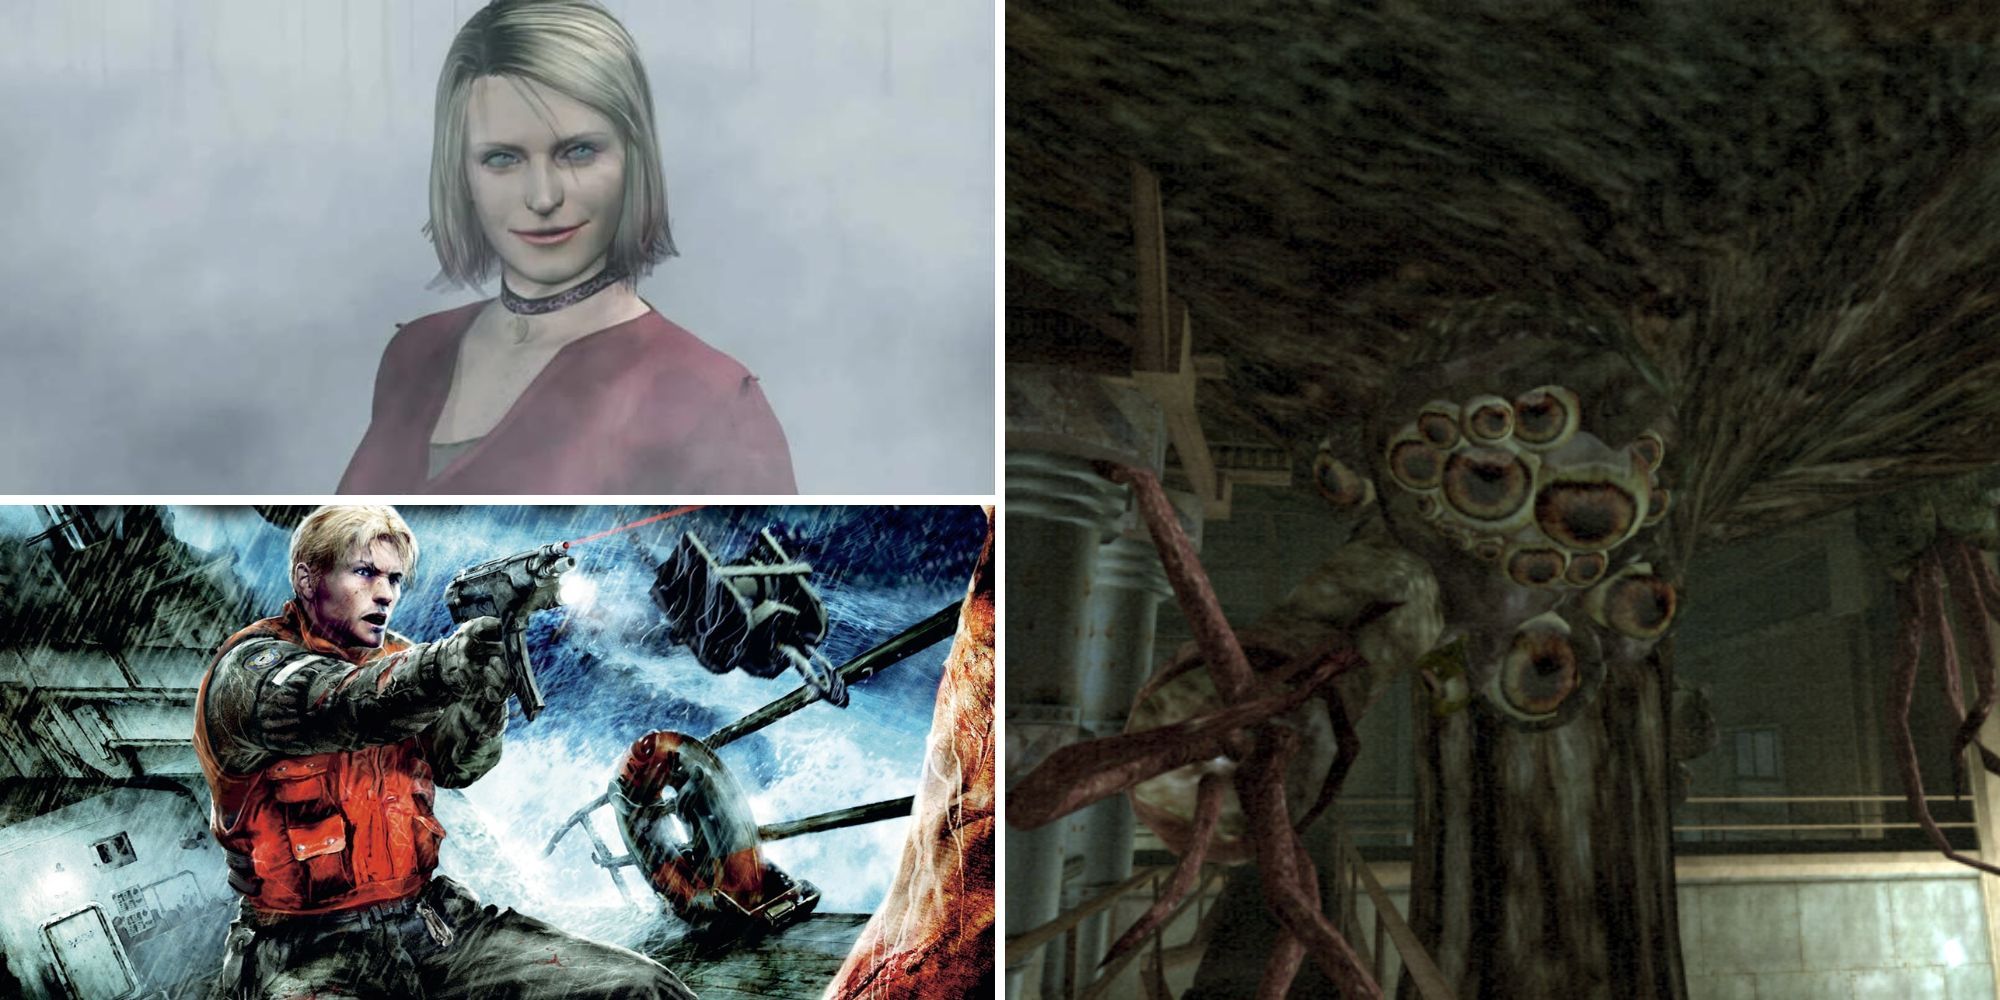 Collage of the best original Xbox horror games (Silent Hill 2: Restless Dreams, Call of Cthulhu: Dark Corners of the Earth)